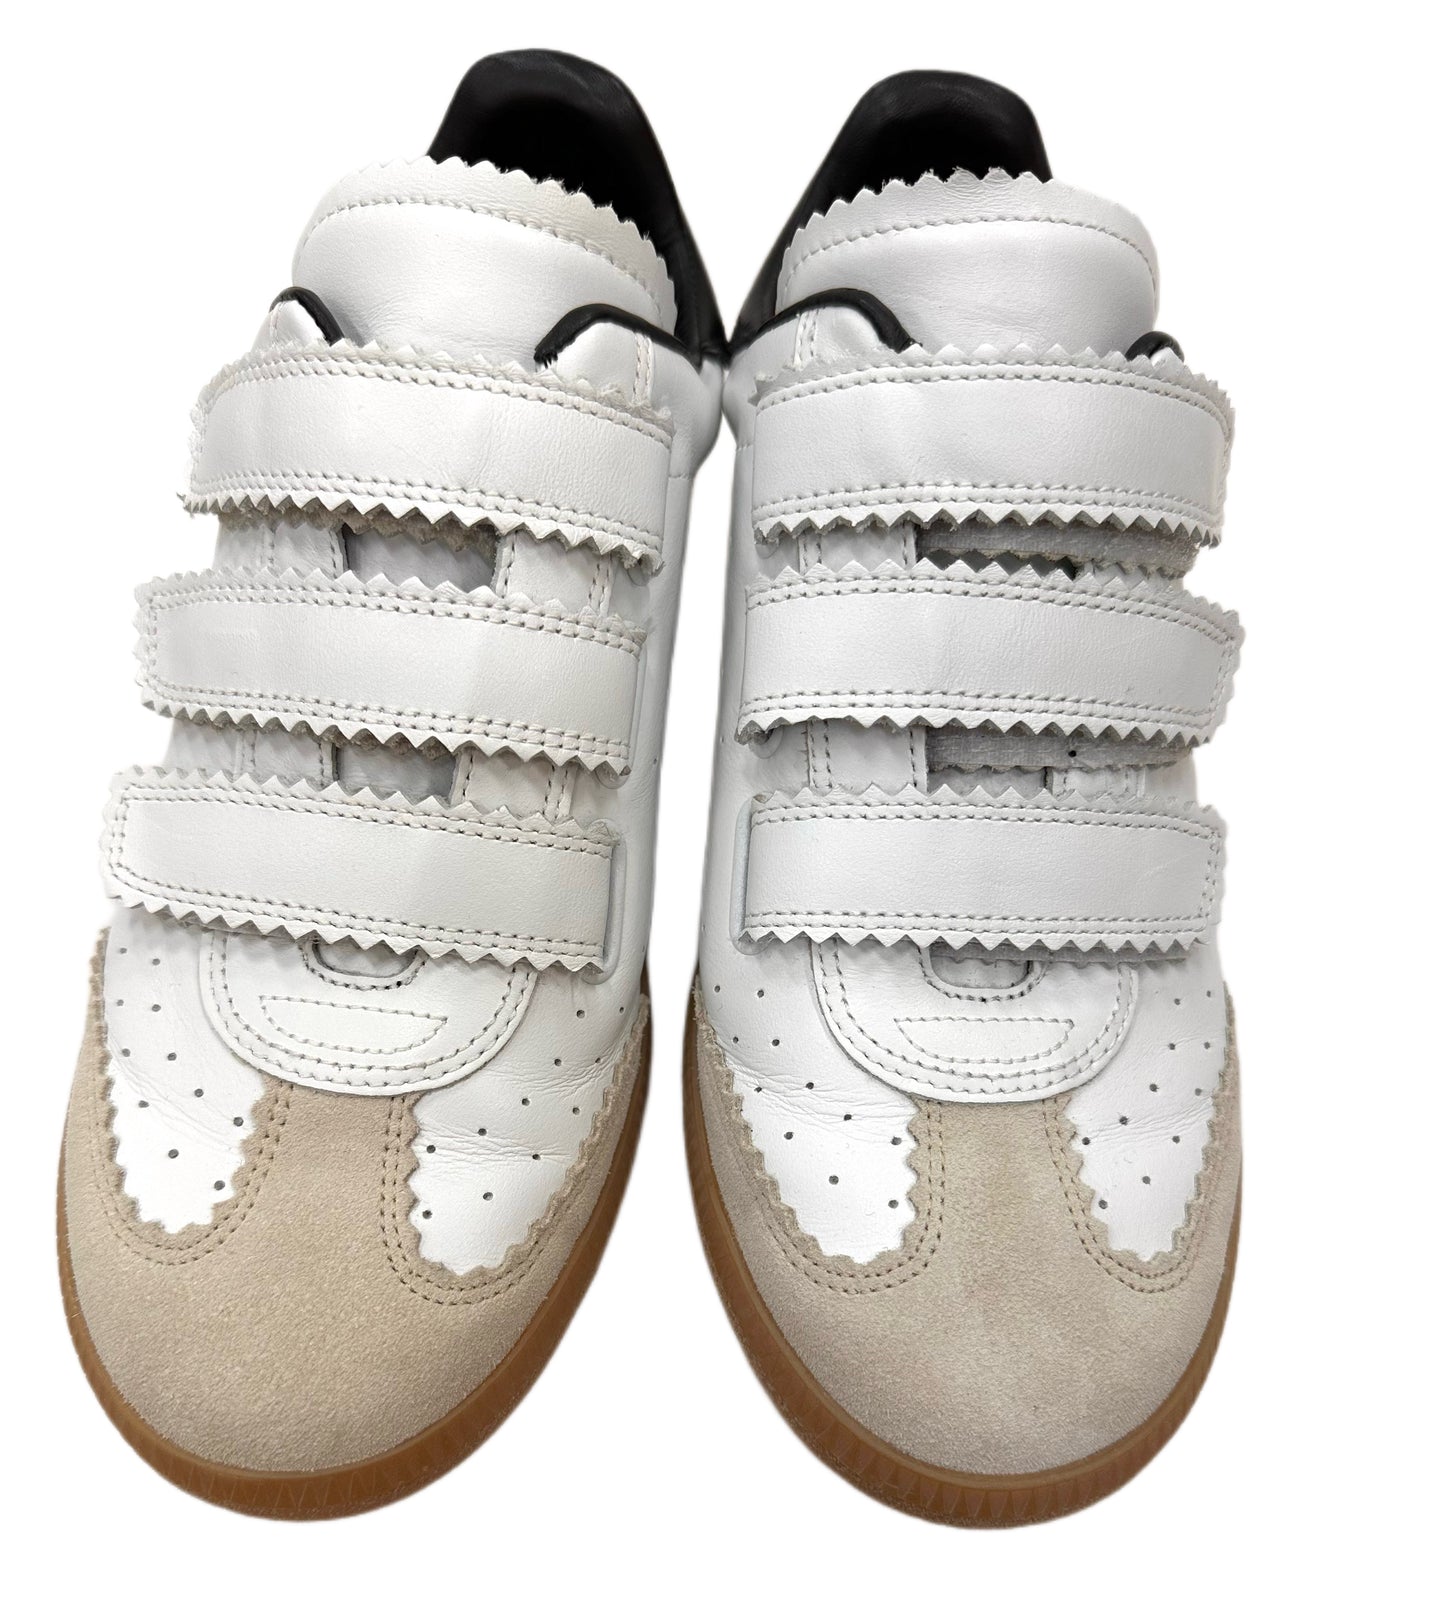 ISABEL MARANT Perforated Grip Strap Sneakers Size 38